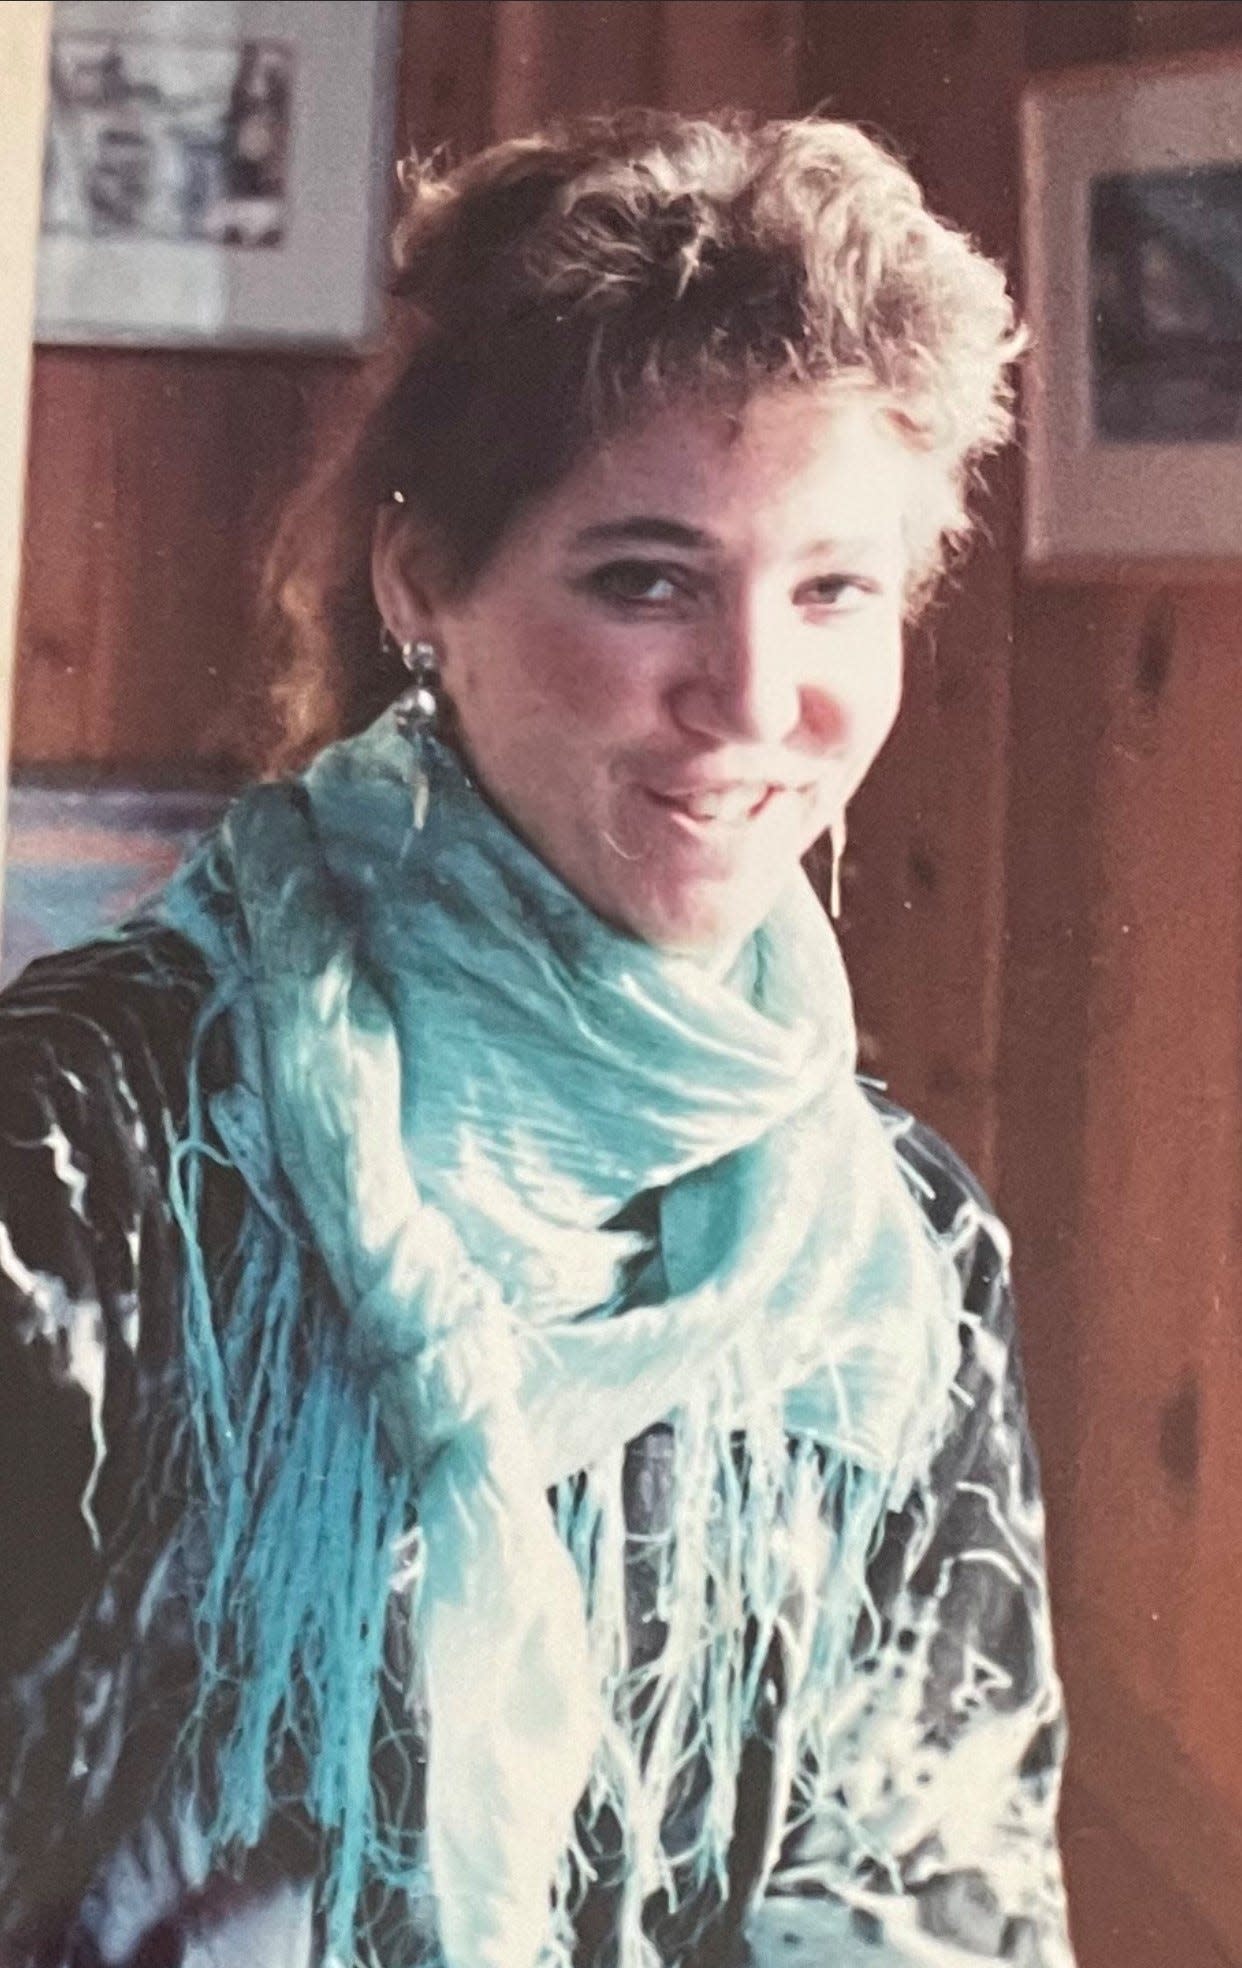 34-year-old Suzanne Kjellenberg has been identified as one of the victims of the "Happy Face Killer" after 29 years of going unknown.